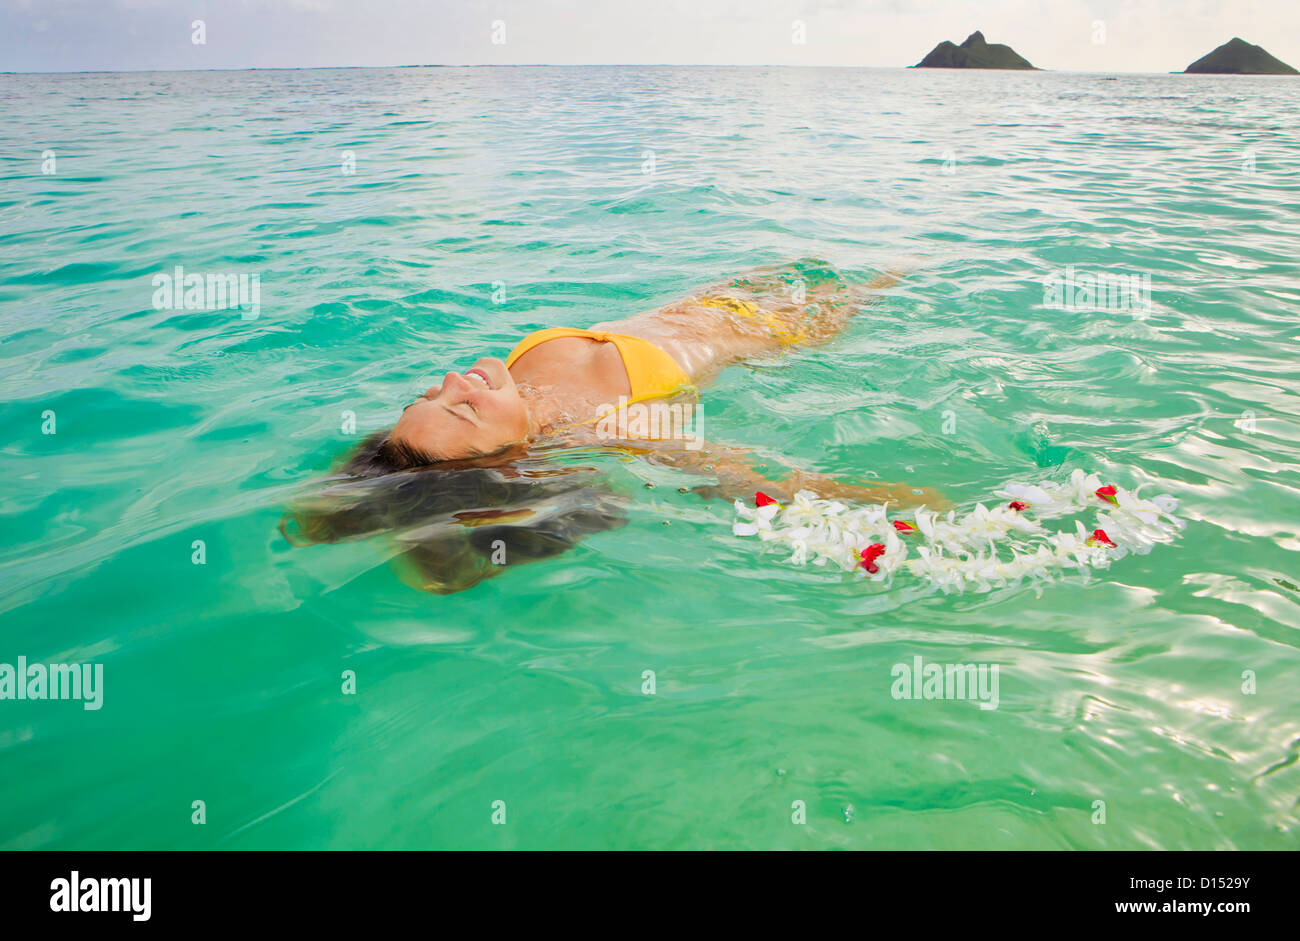 Hawaii, Oahu, Lanikai, Young Woman Floating In Tropical Ocean Water With Lei. Stock Photo